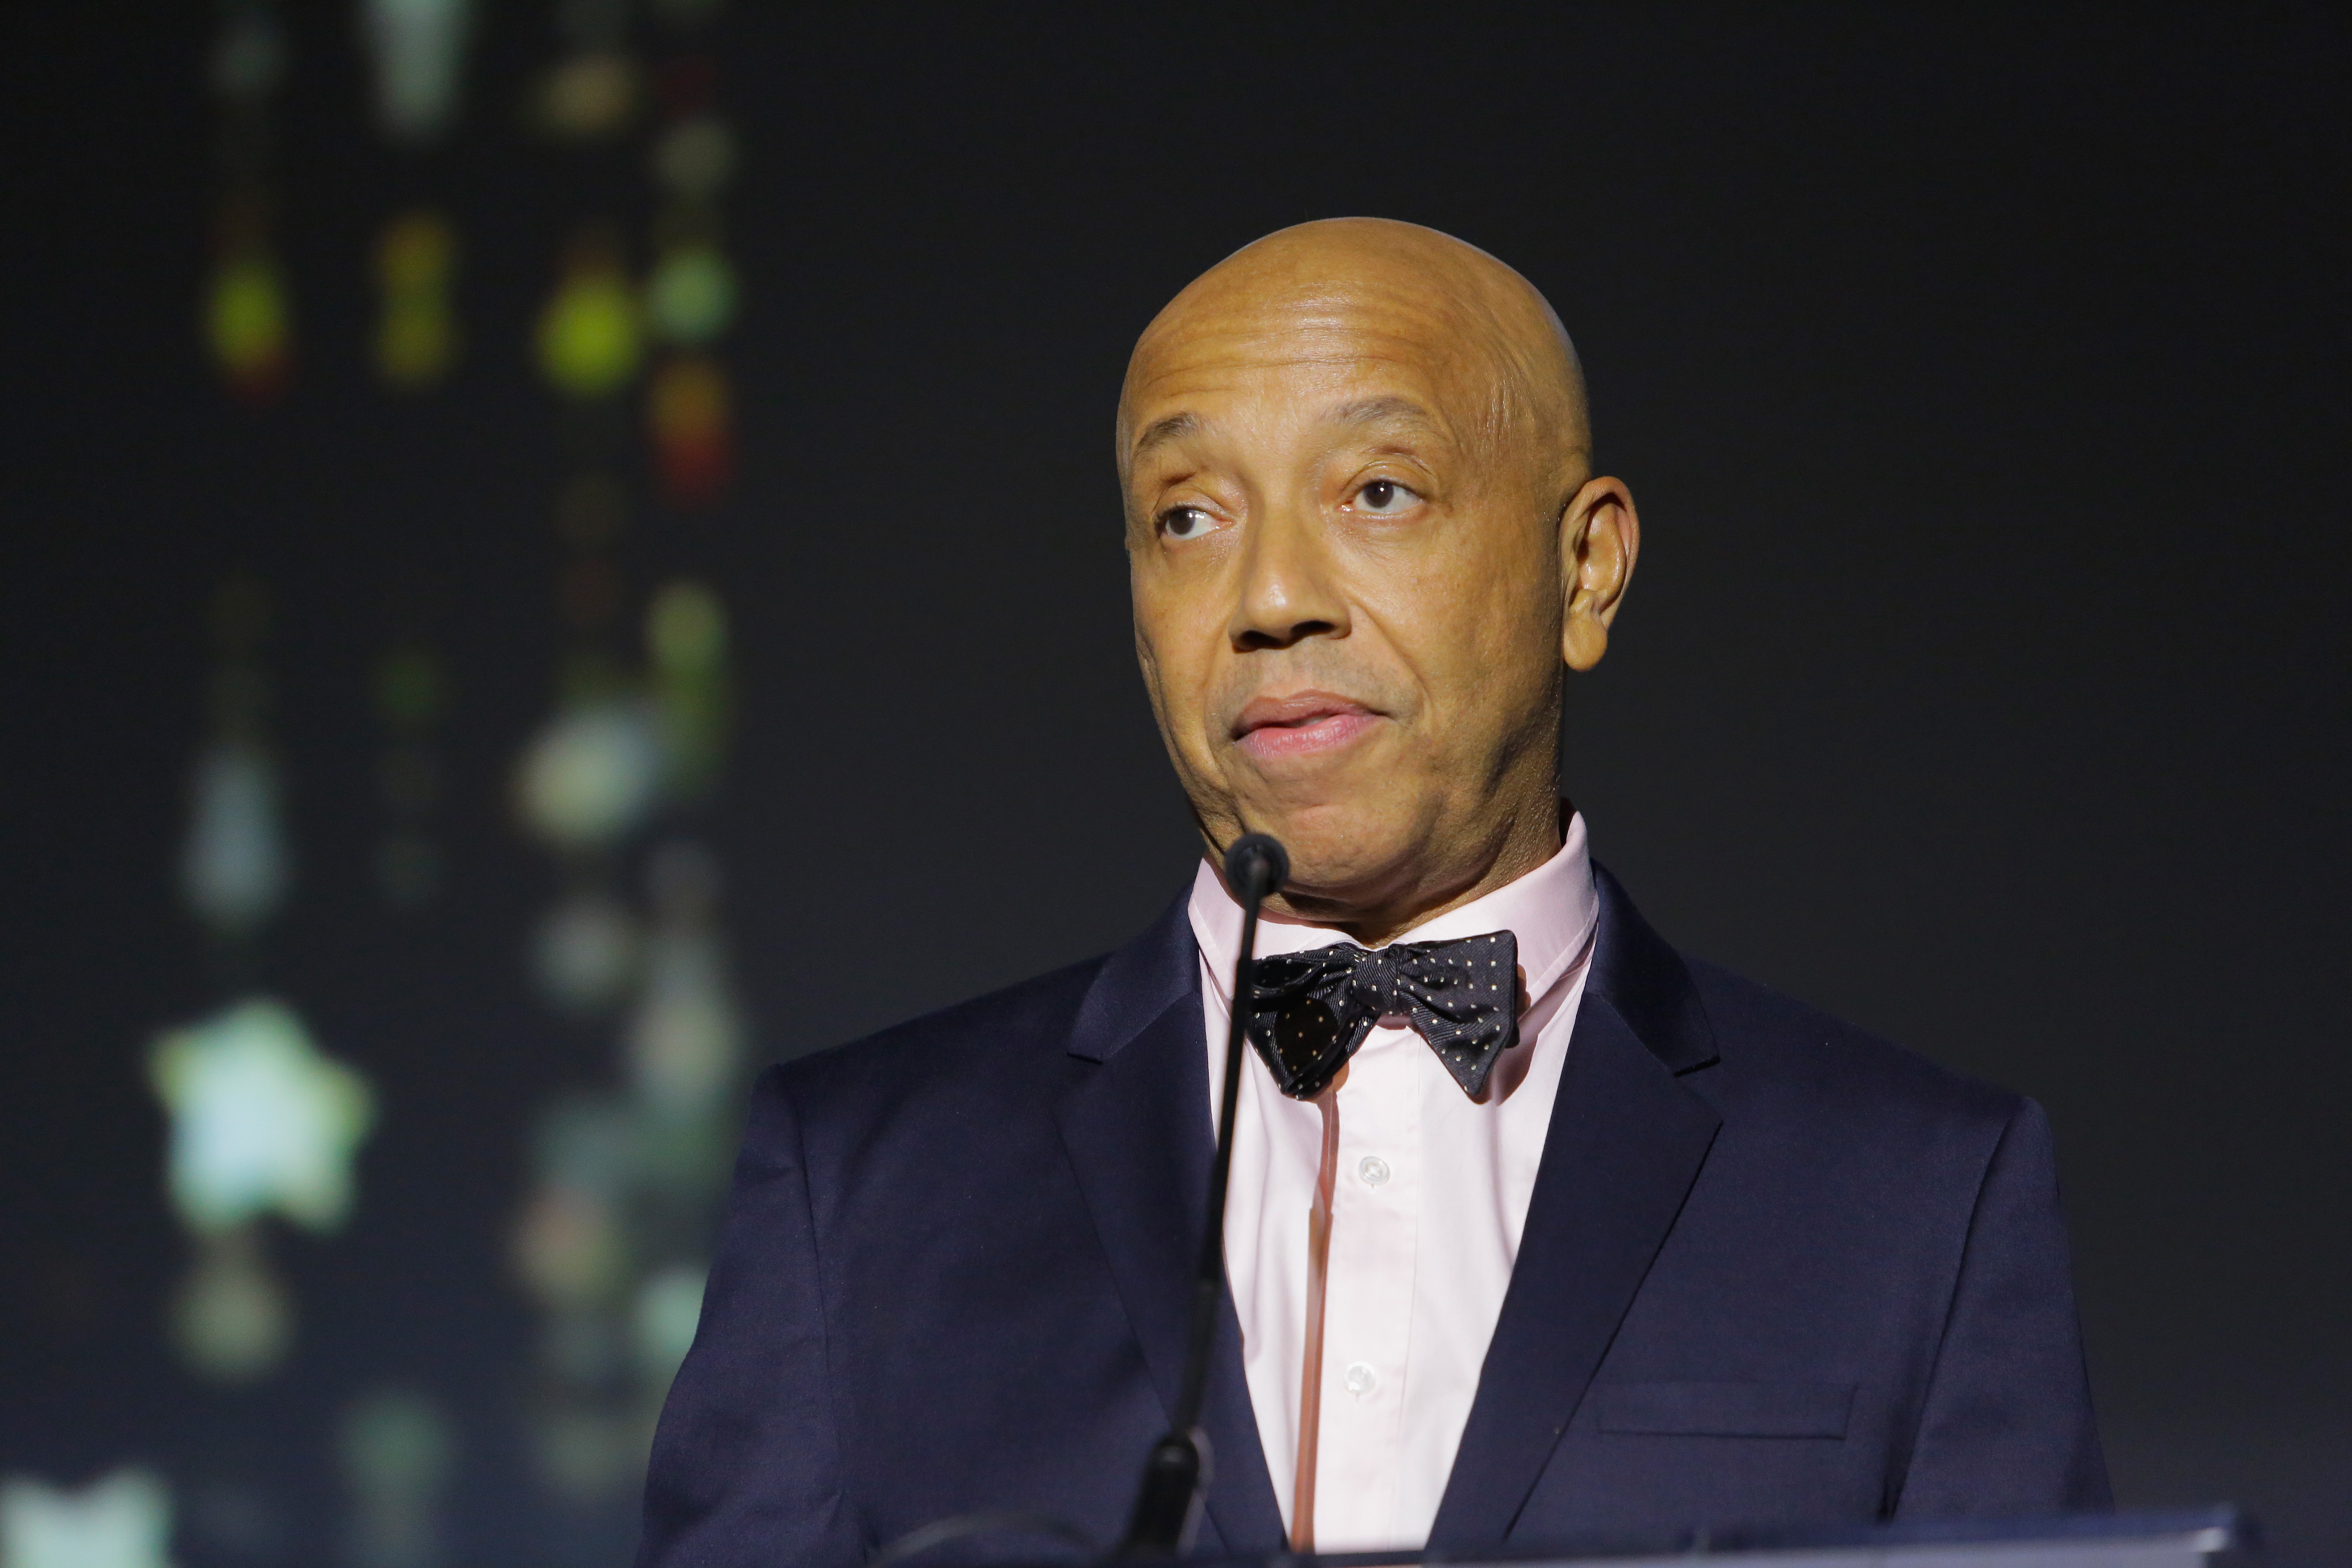 Russell Simmons Again Accused of Rape